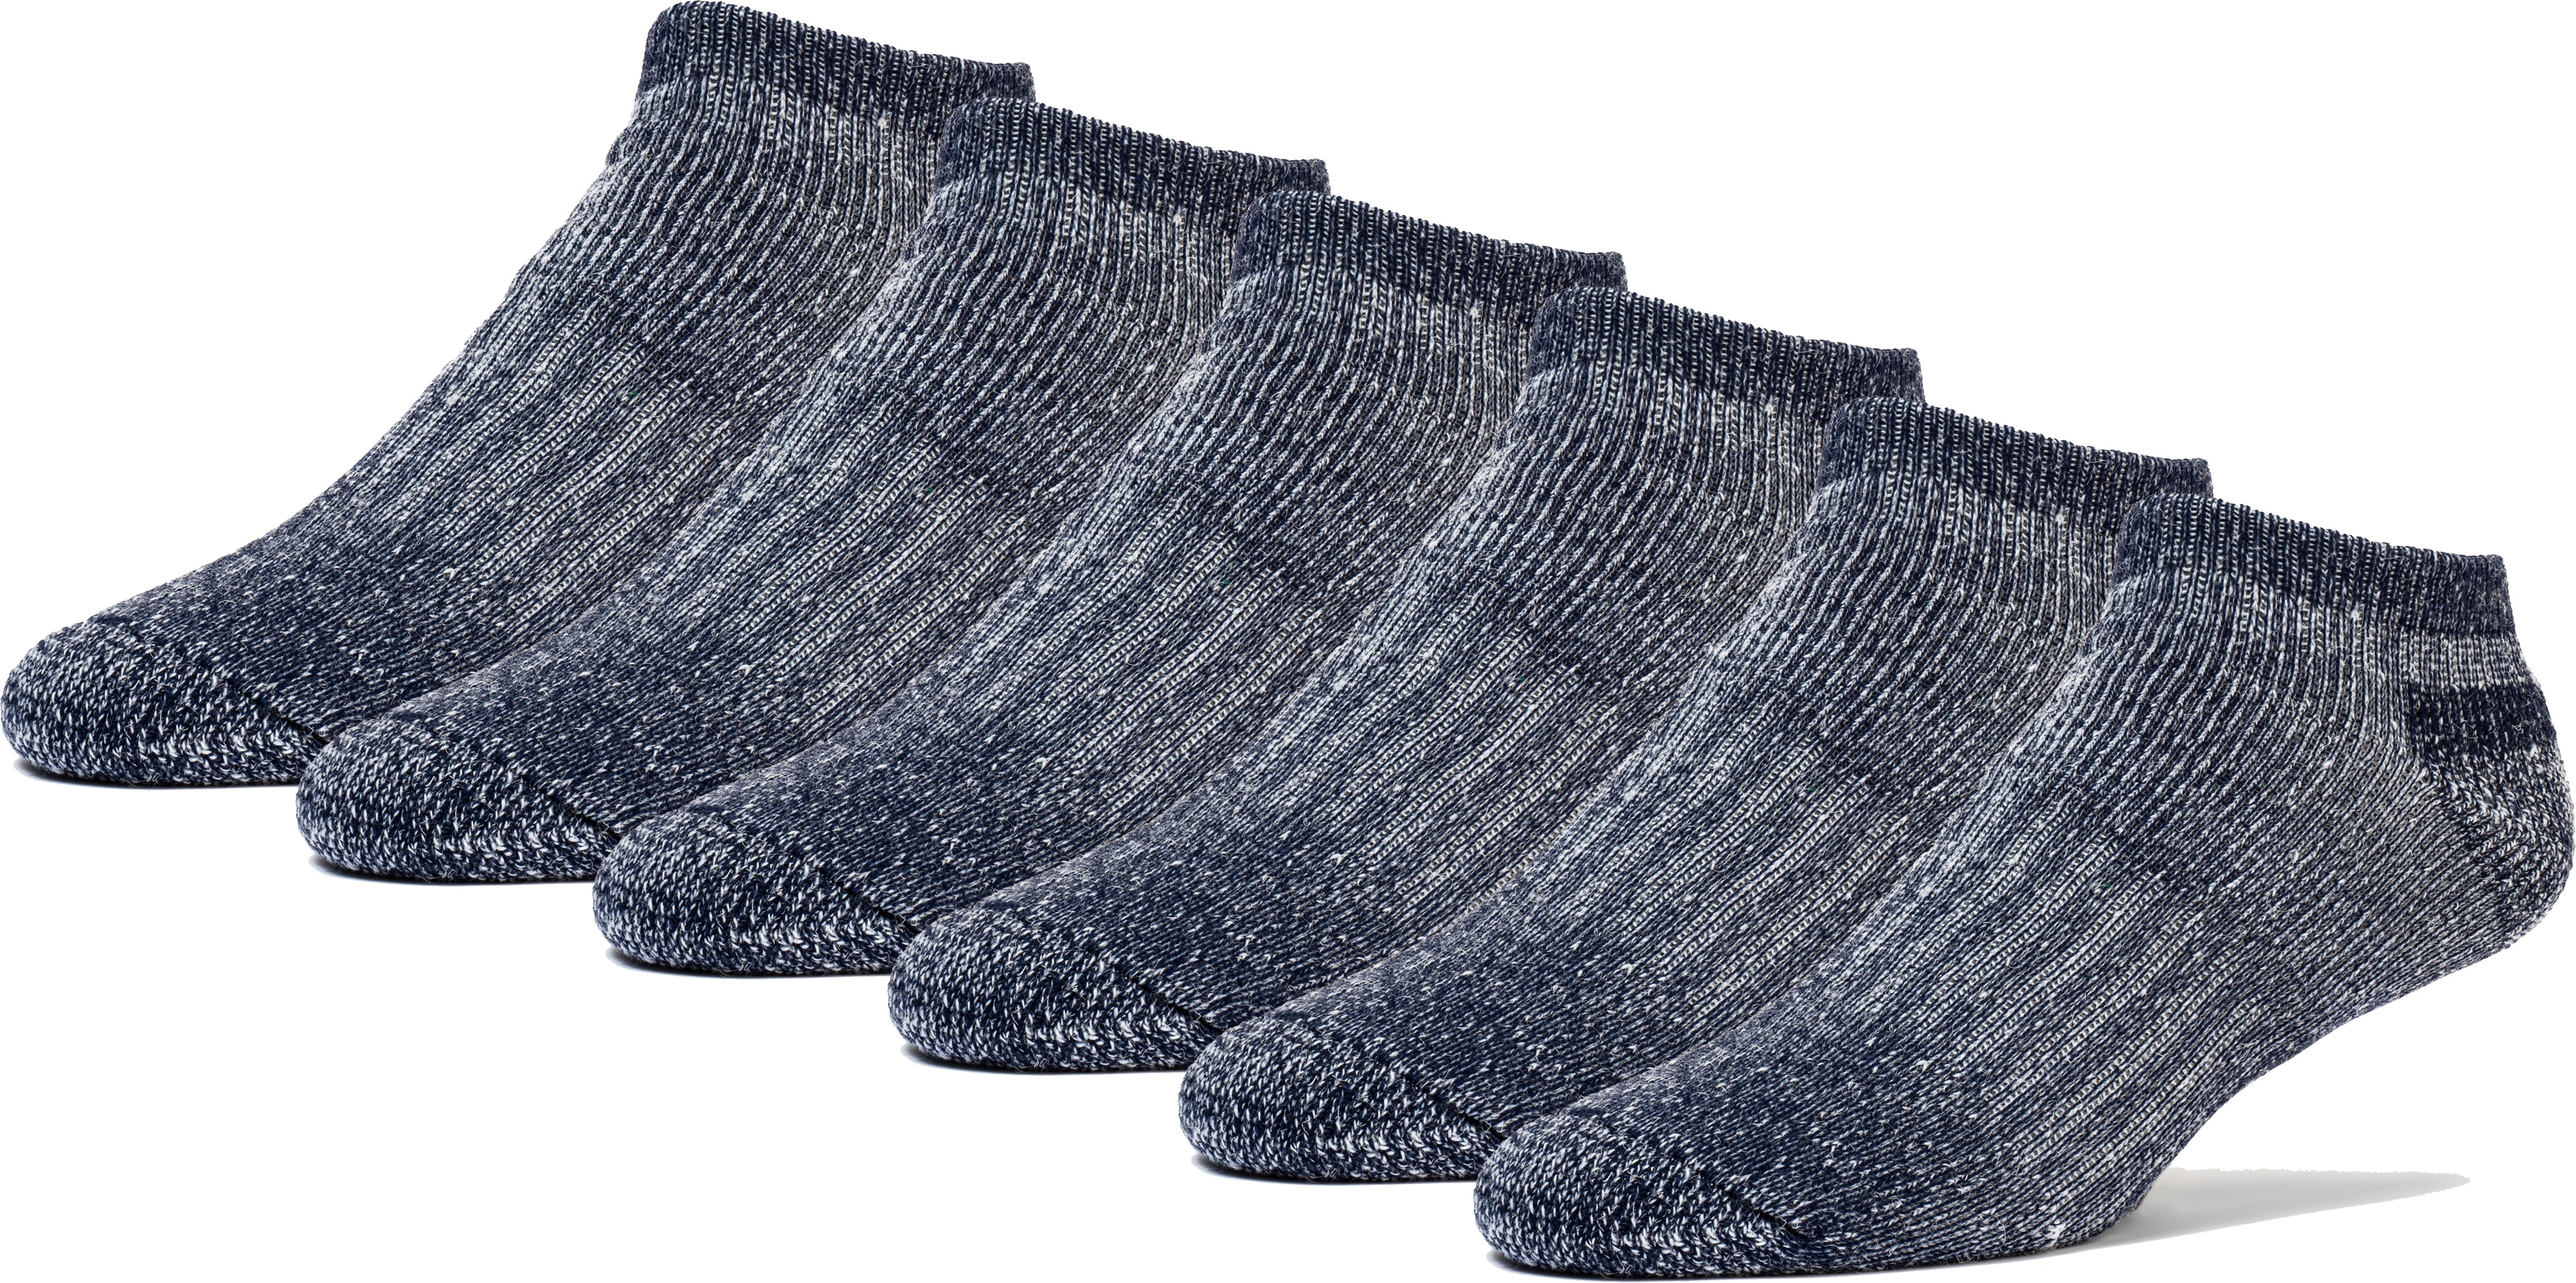 Men's Wool Low Cut Socks - 50 Percent Wool - Strong Arch Support - Cushioned Bottom - Ideal for Hiking and Summer Activities -6 Pairs-